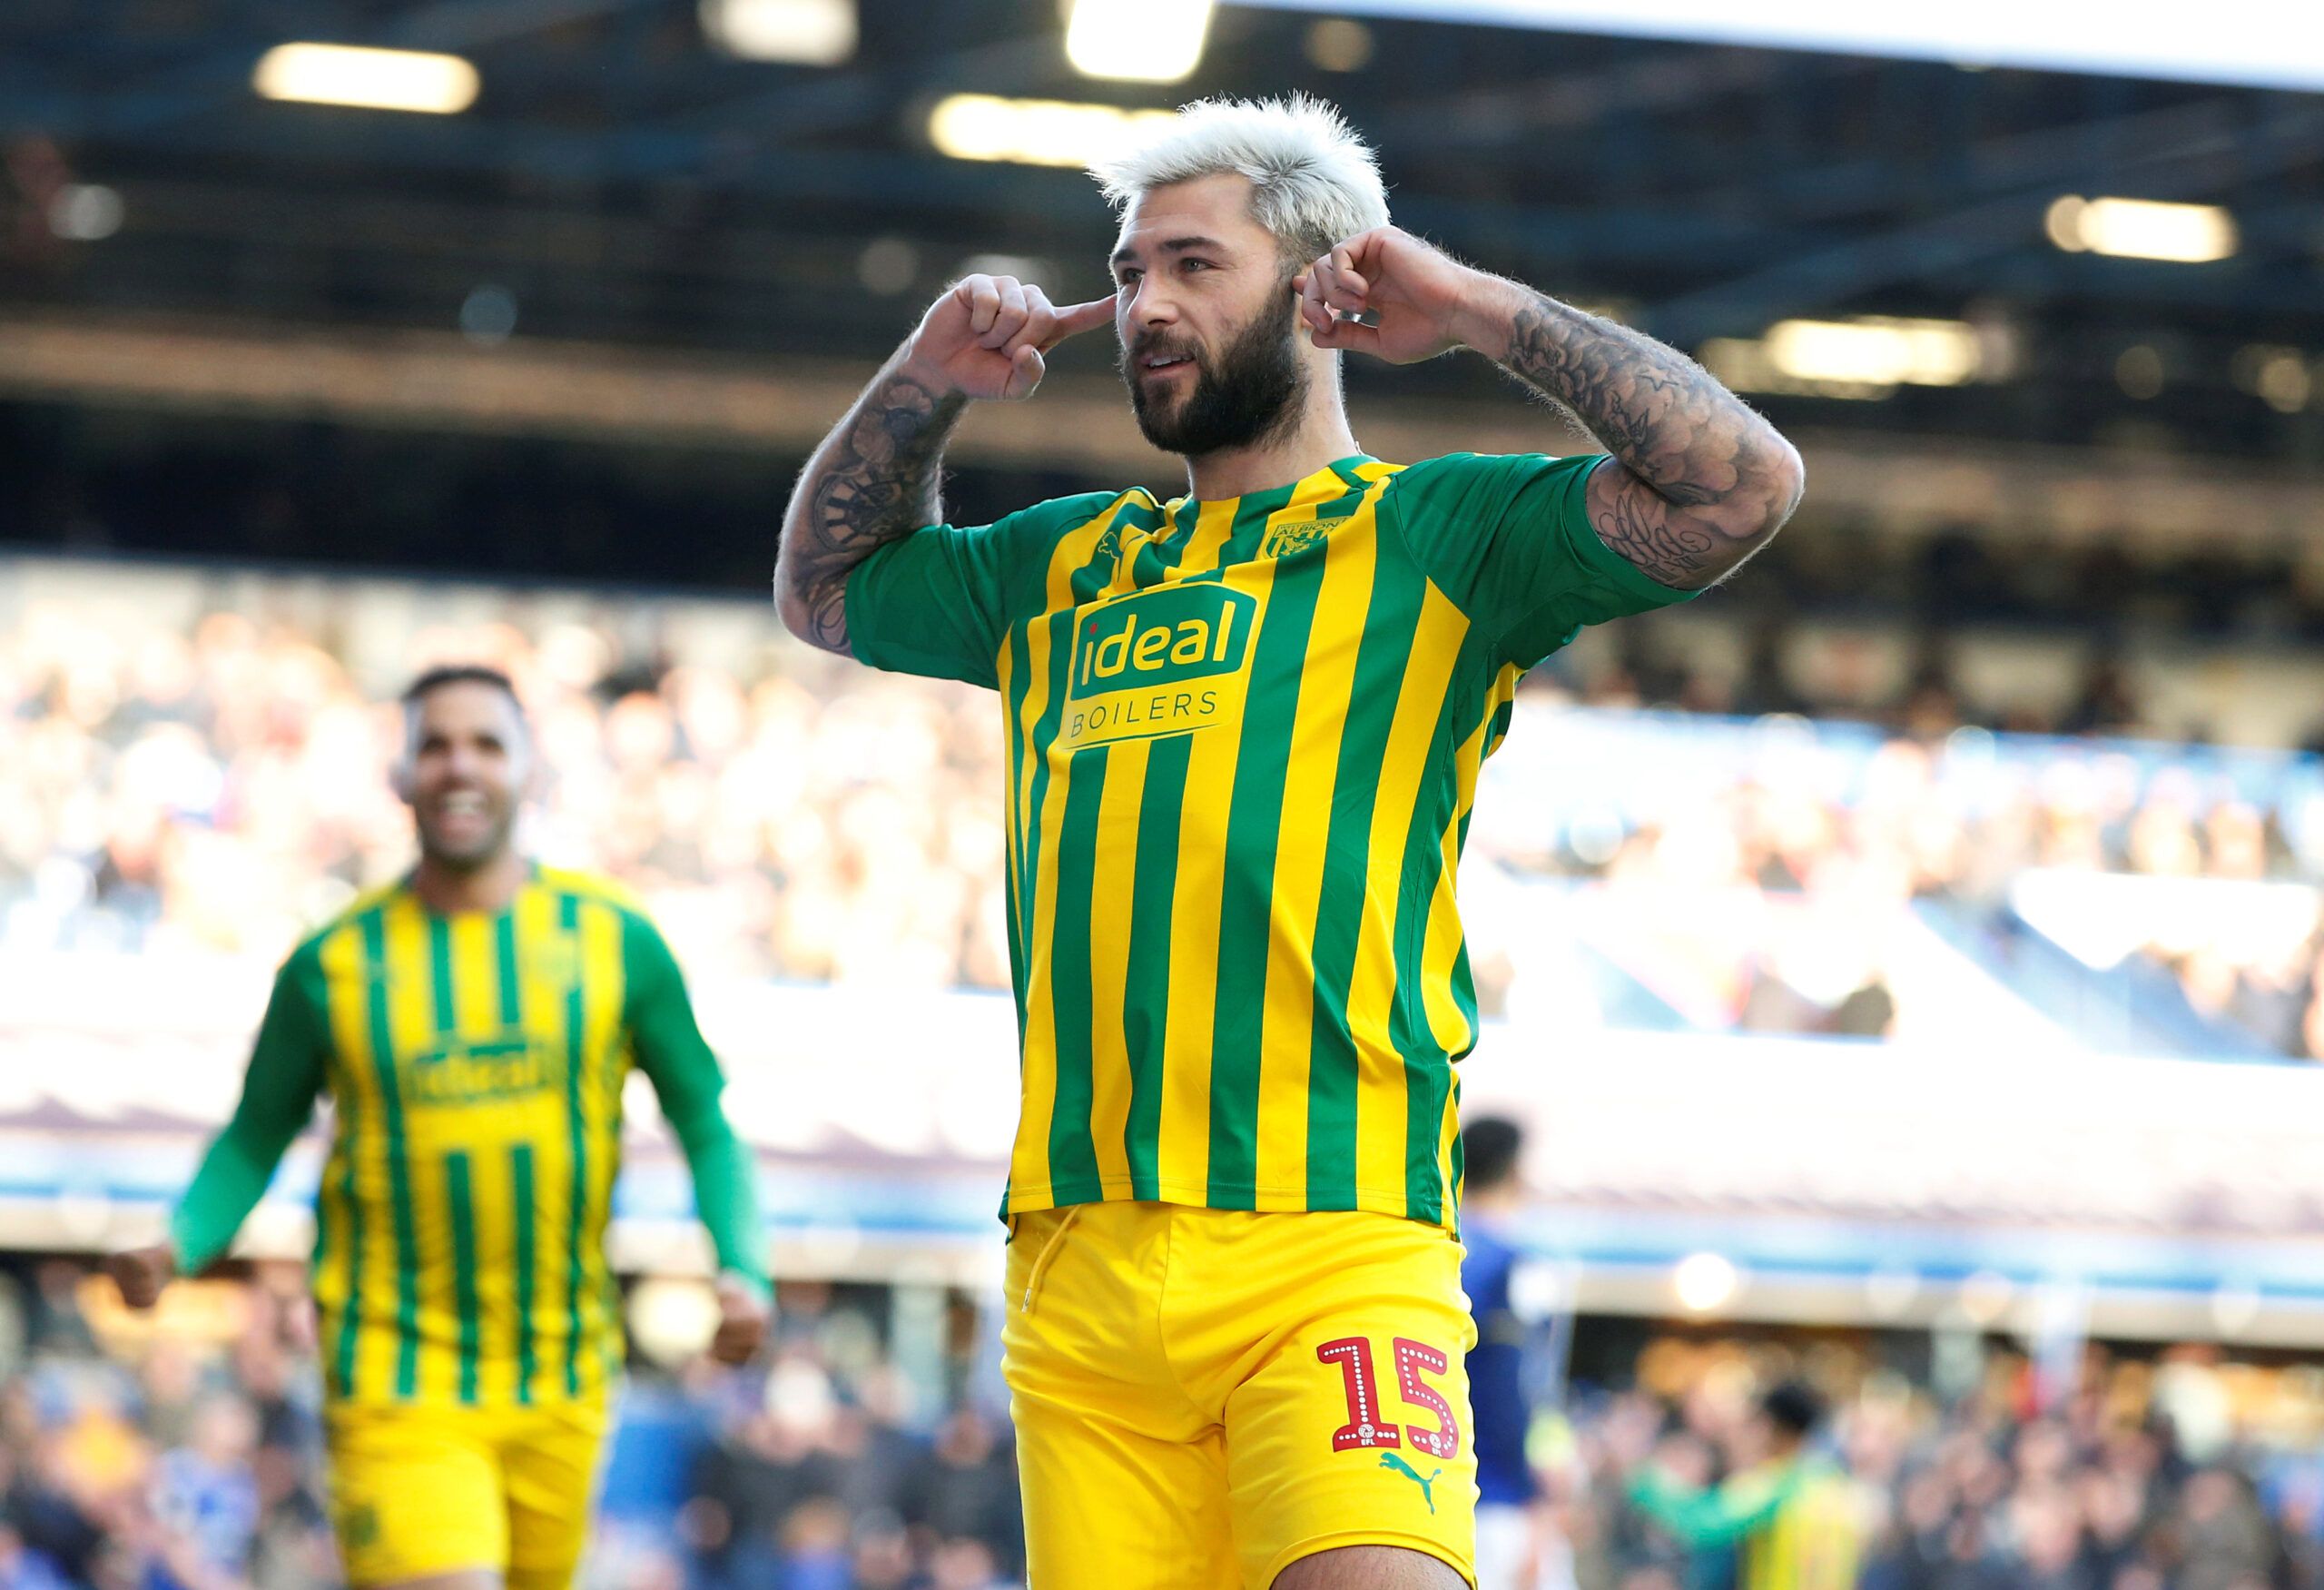 Soccer Football - Championship - Birmingham City v West Bromwich Albion - St Andrews, Birmingham, Britain - December 14, 2019  West Bromwich Albion's Charlie Austin celebrates scoring their third goal   Action Images/Ed Sykes  EDITORIAL USE ONLY. No use with unauthorized audio, video, data, fixture lists, club/league logos or 